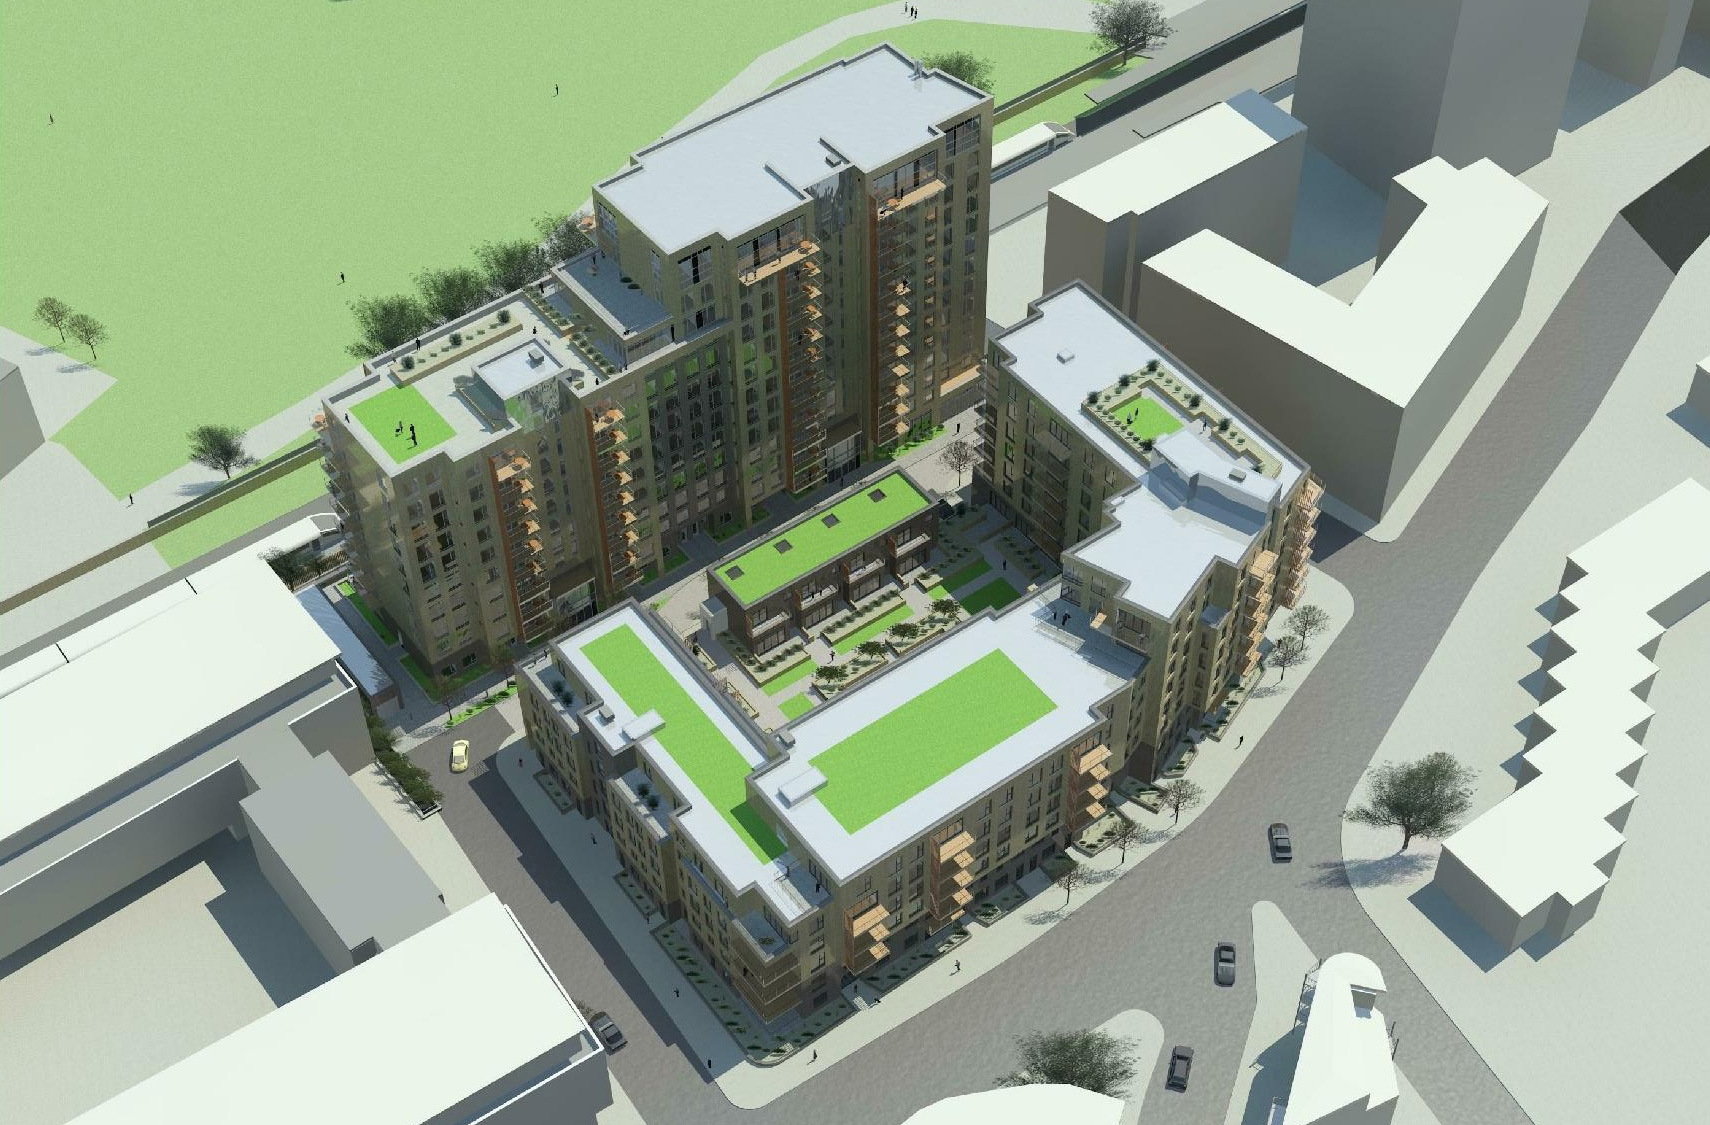 London Dockland apartment scheme submitted for Planning Approval